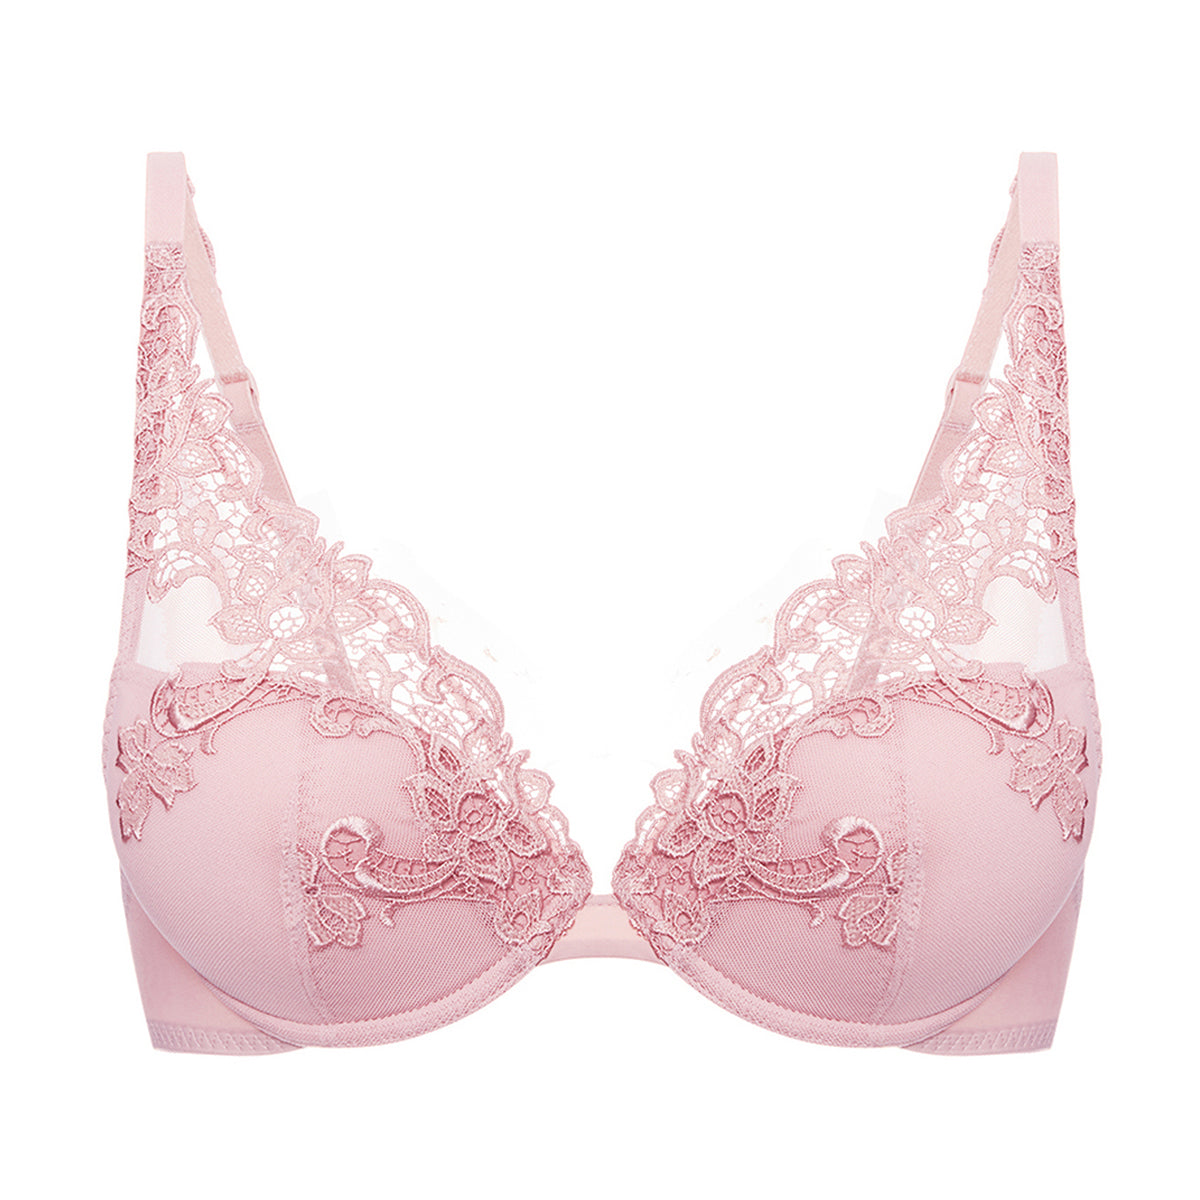 Buy Victoria's Secret Pink Lace Trim Full Cup Push Up Bra from Next Latvia